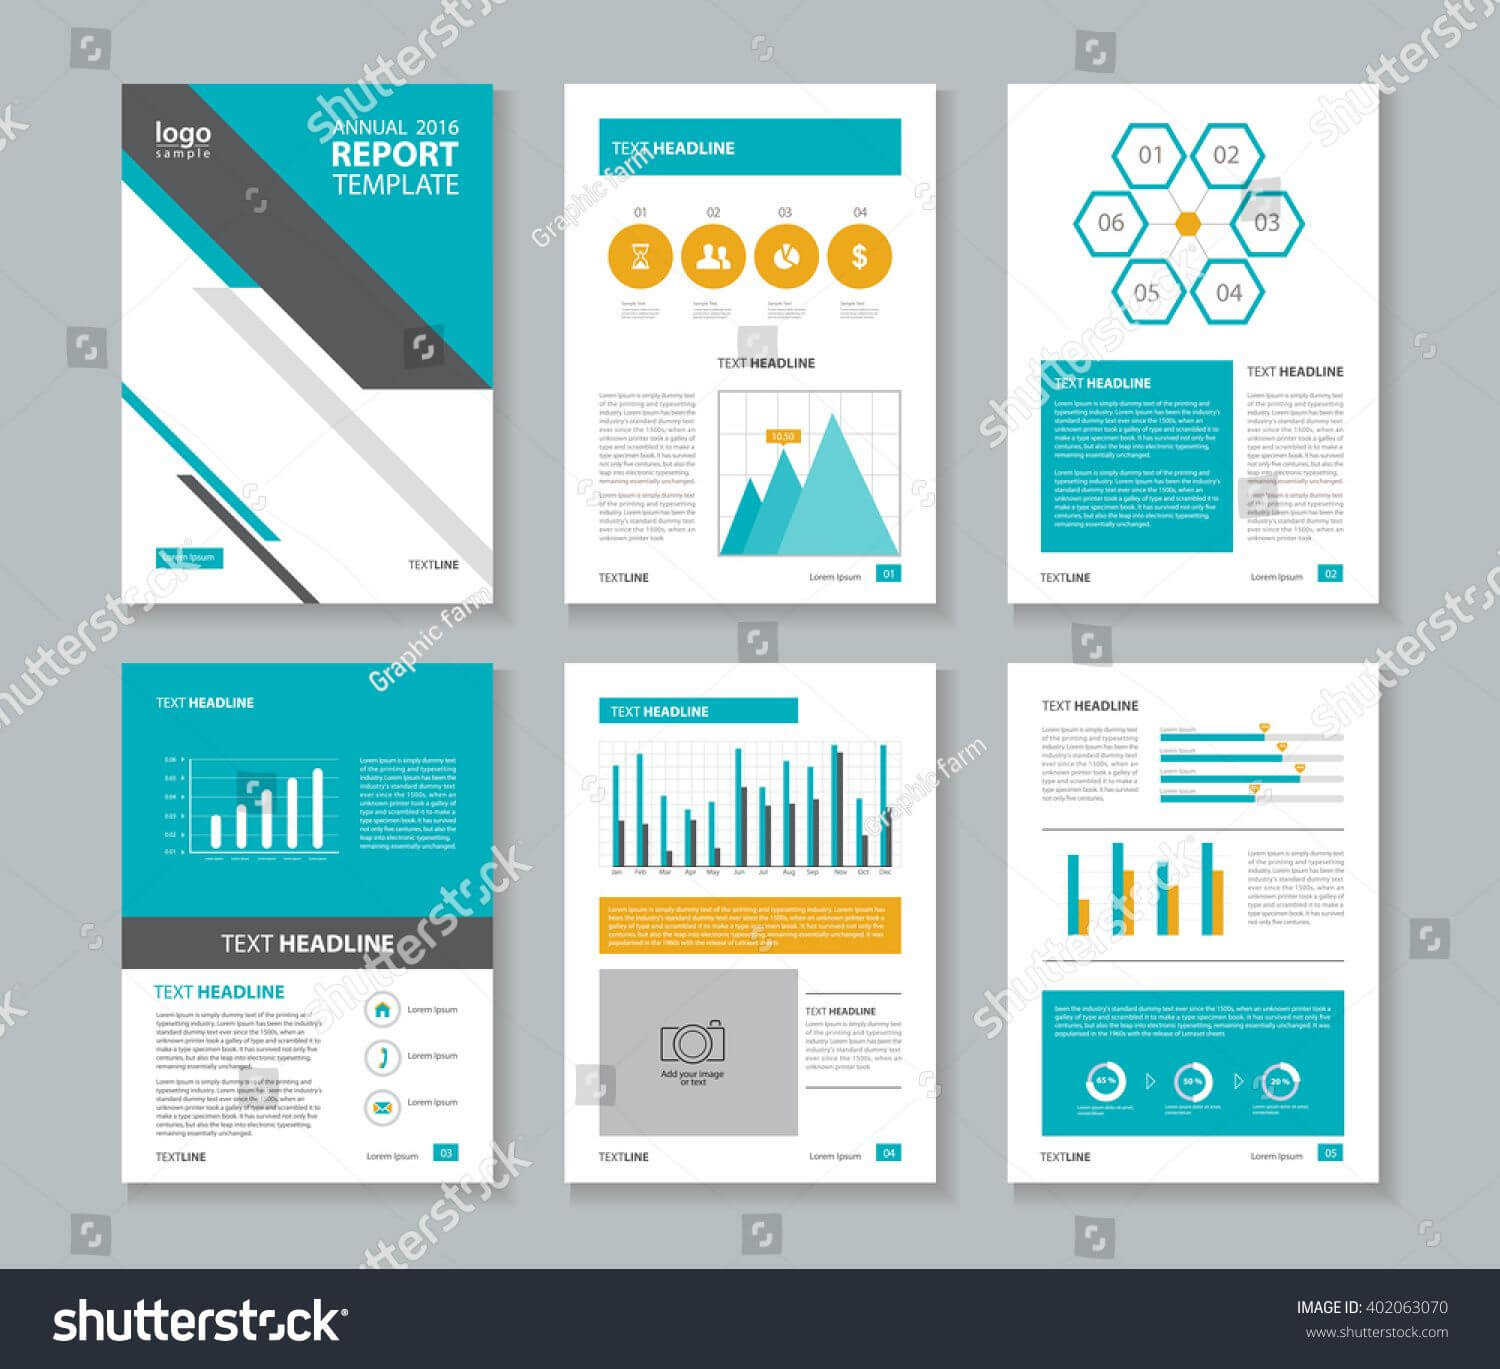 Pinsharon K On Design : Info Display | Company Profile Pertaining To Annual Report Word Template